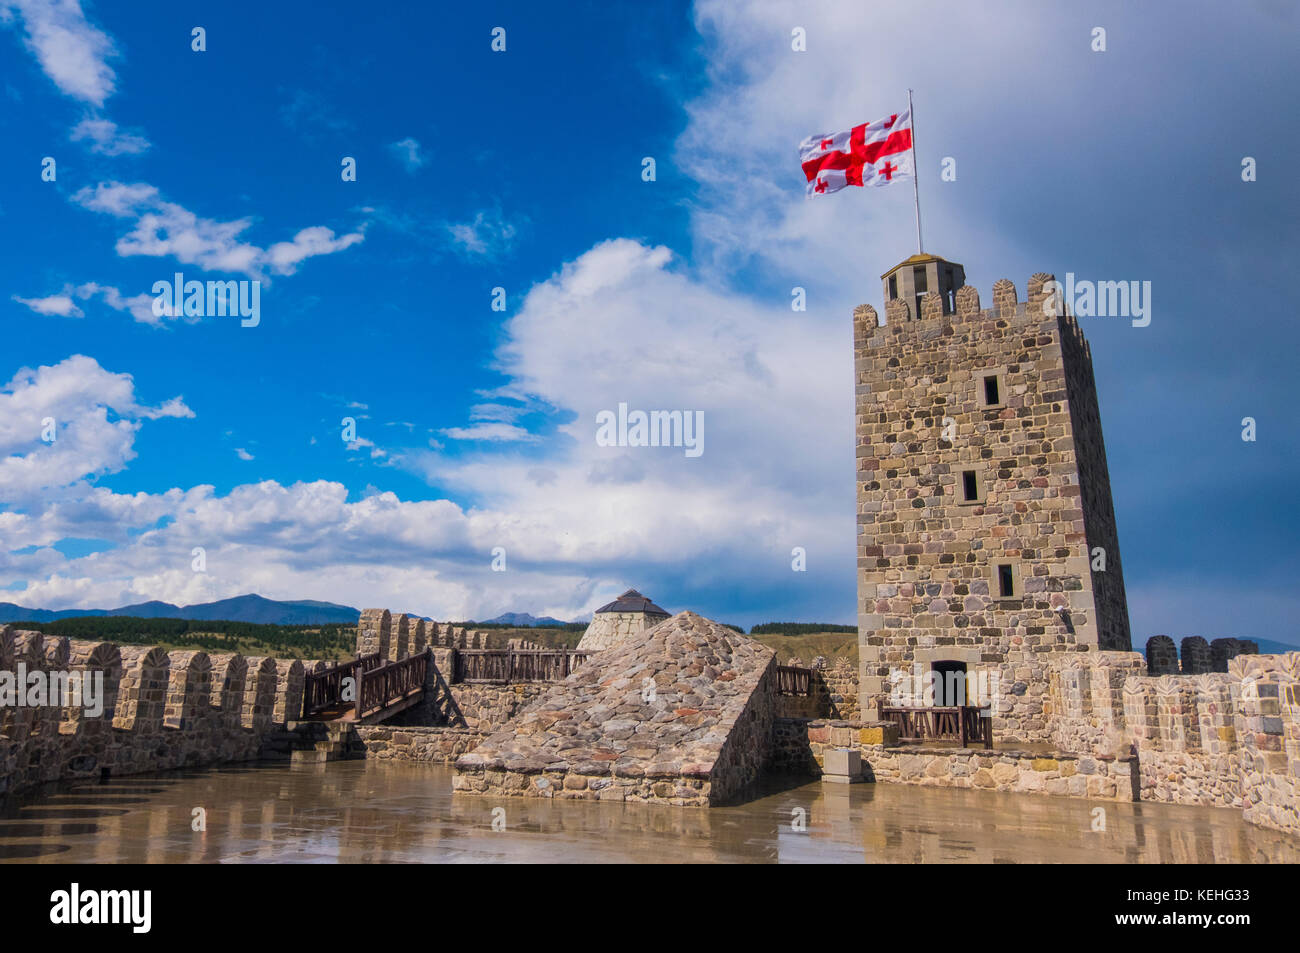 Flag blowing in wind on top of castle Stock Photo